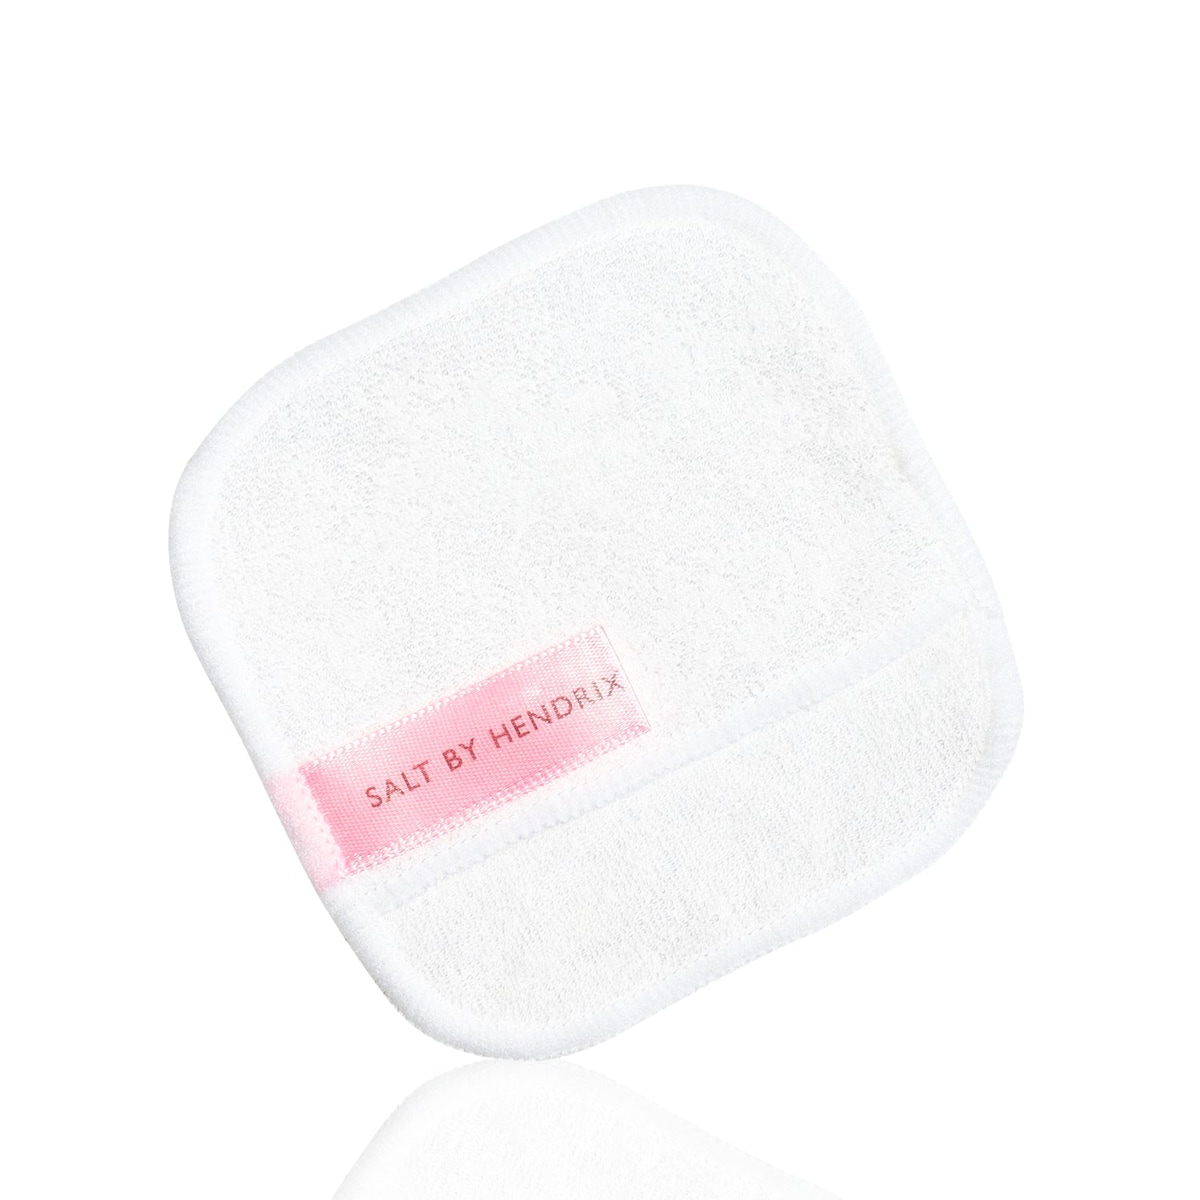 Salt By Hendrix Round-Ish Bamboo Face Pads